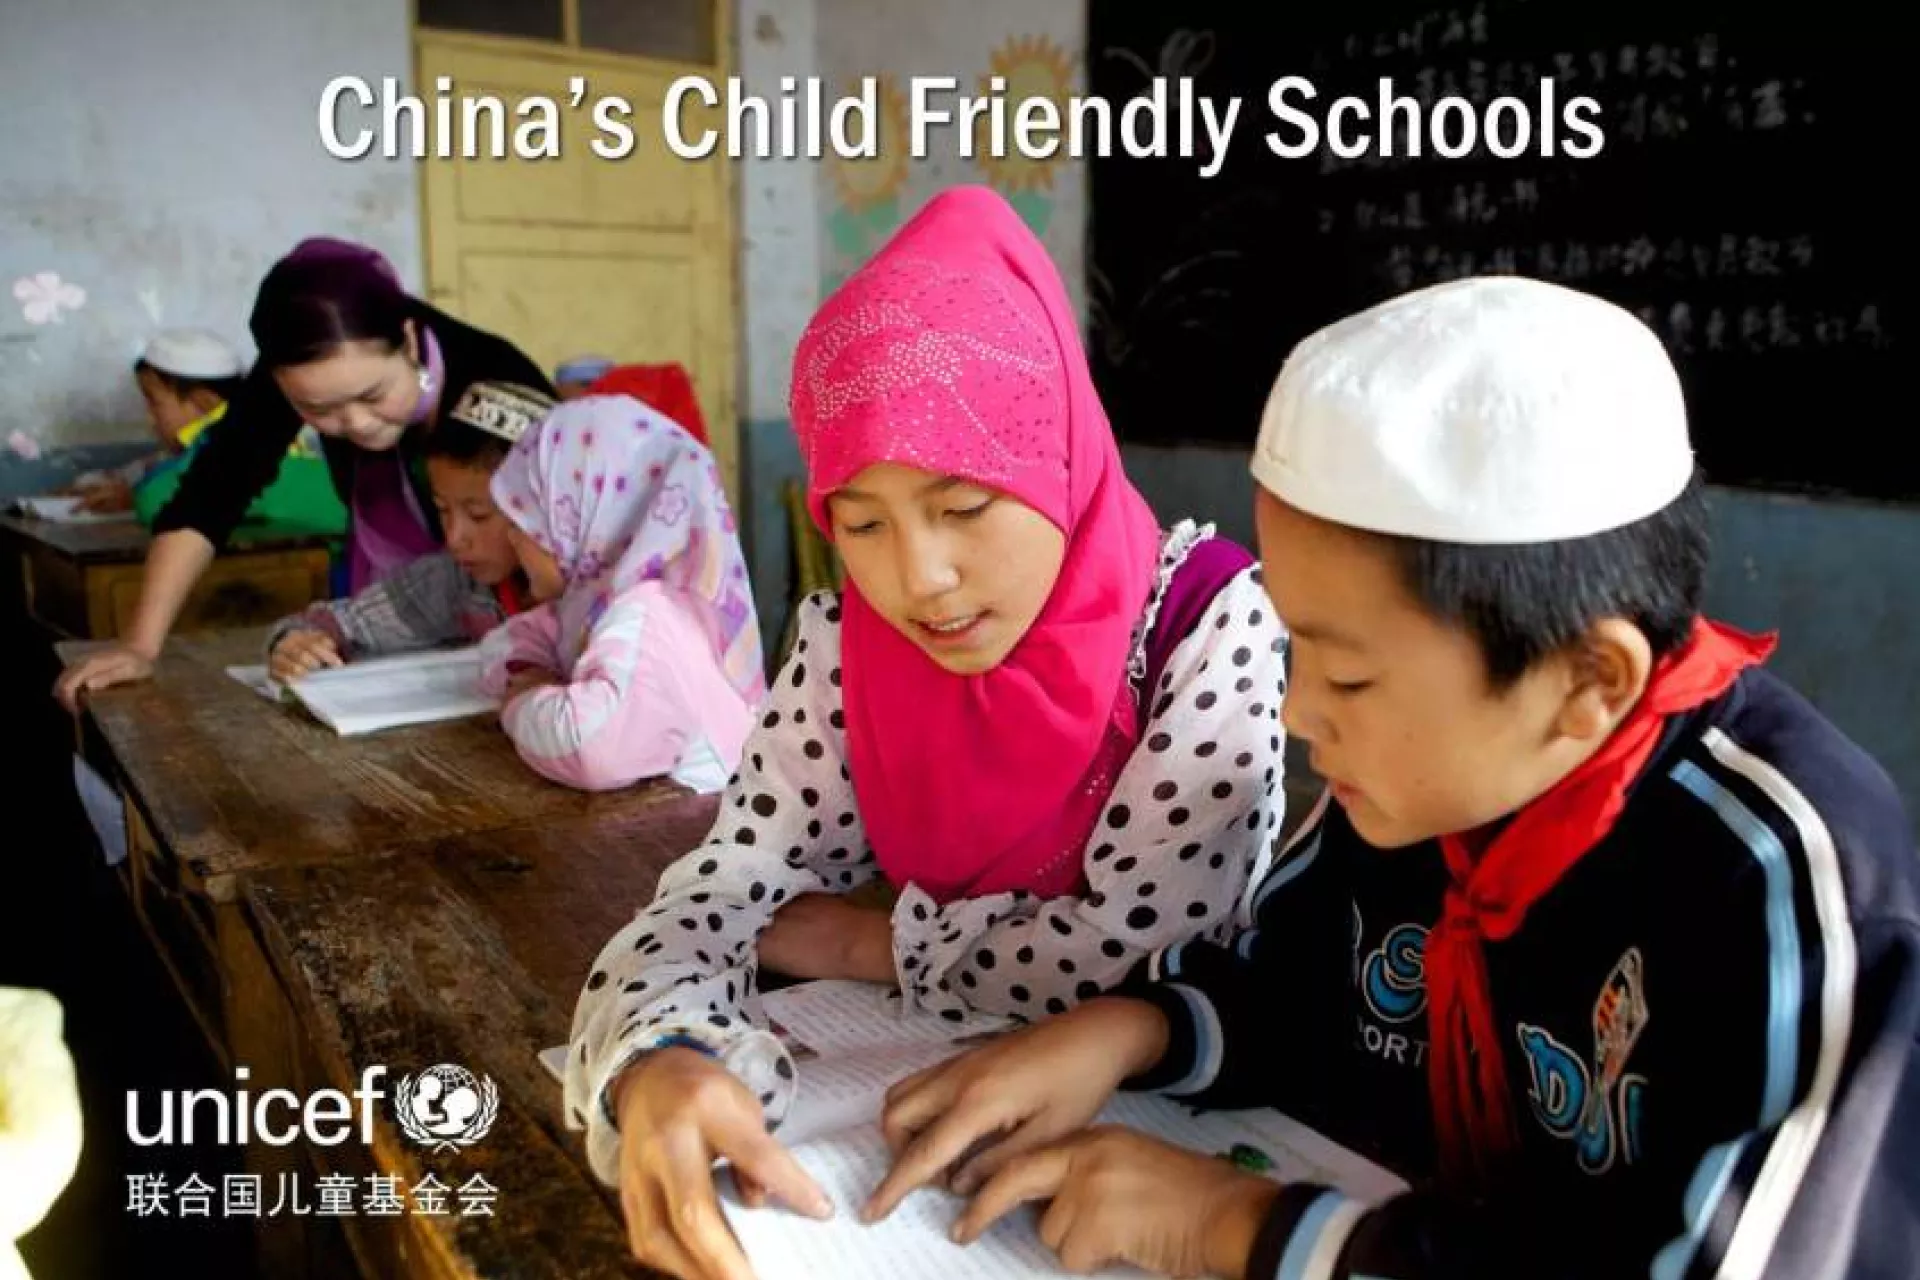 The “Child Friendly School” is a world-wide movement to improve quality and equity in education by helping schools to focus on the “best interests of children.”